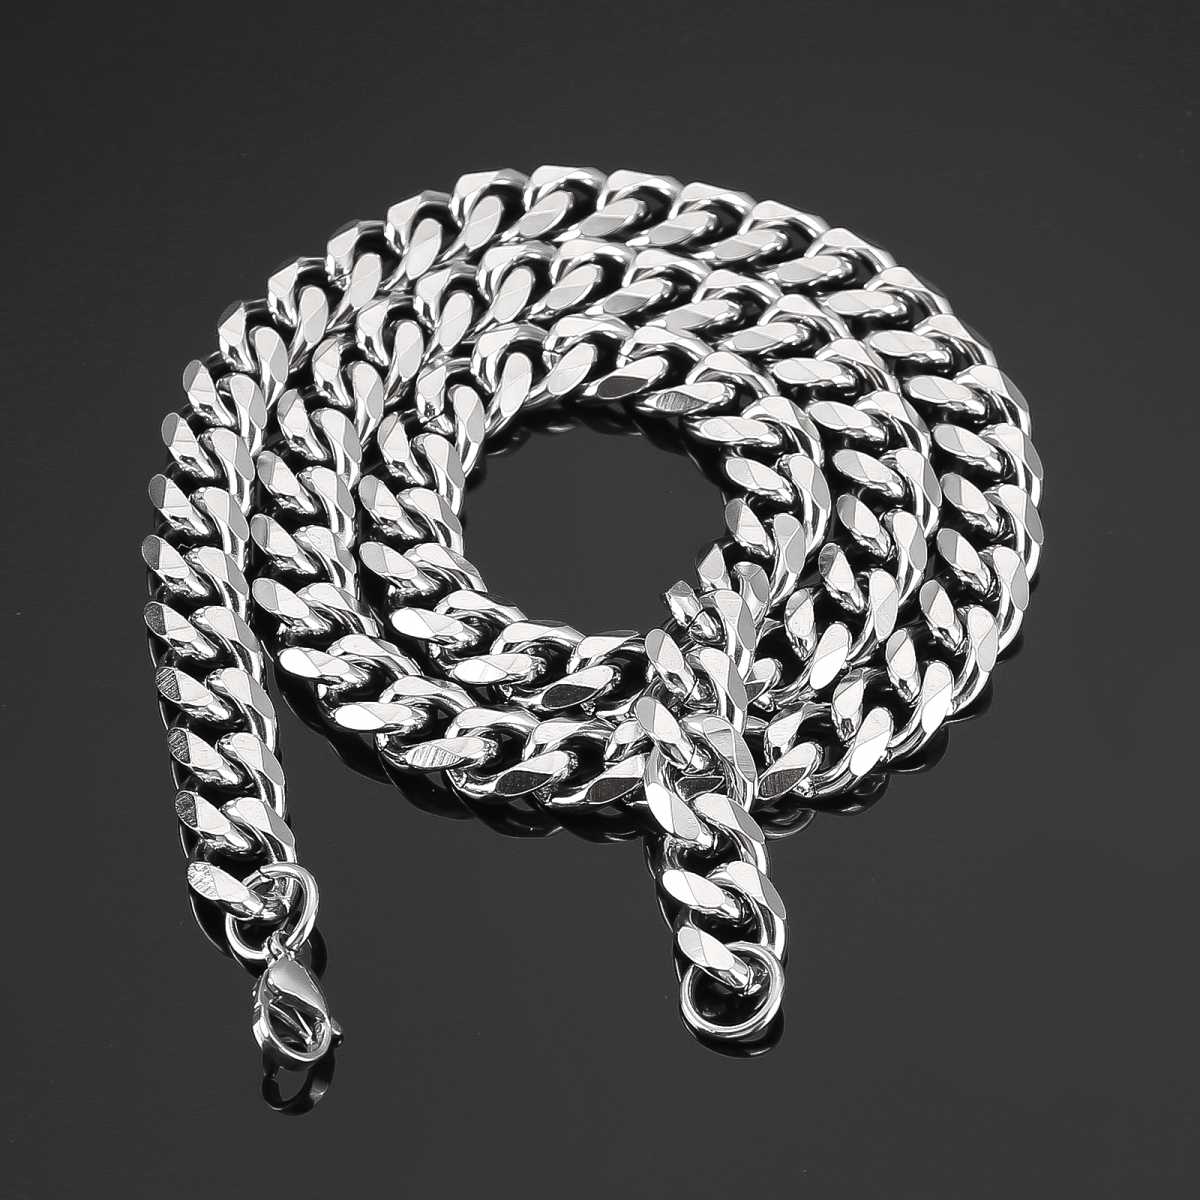 King Chain Necklace US$1.9/PC-NORSECOLLECTION- Viking Jewelry,Viking Necklace,Viking Bracelet,Viking Rings,Viking Mugs,Viking Accessories,Viking Crafts